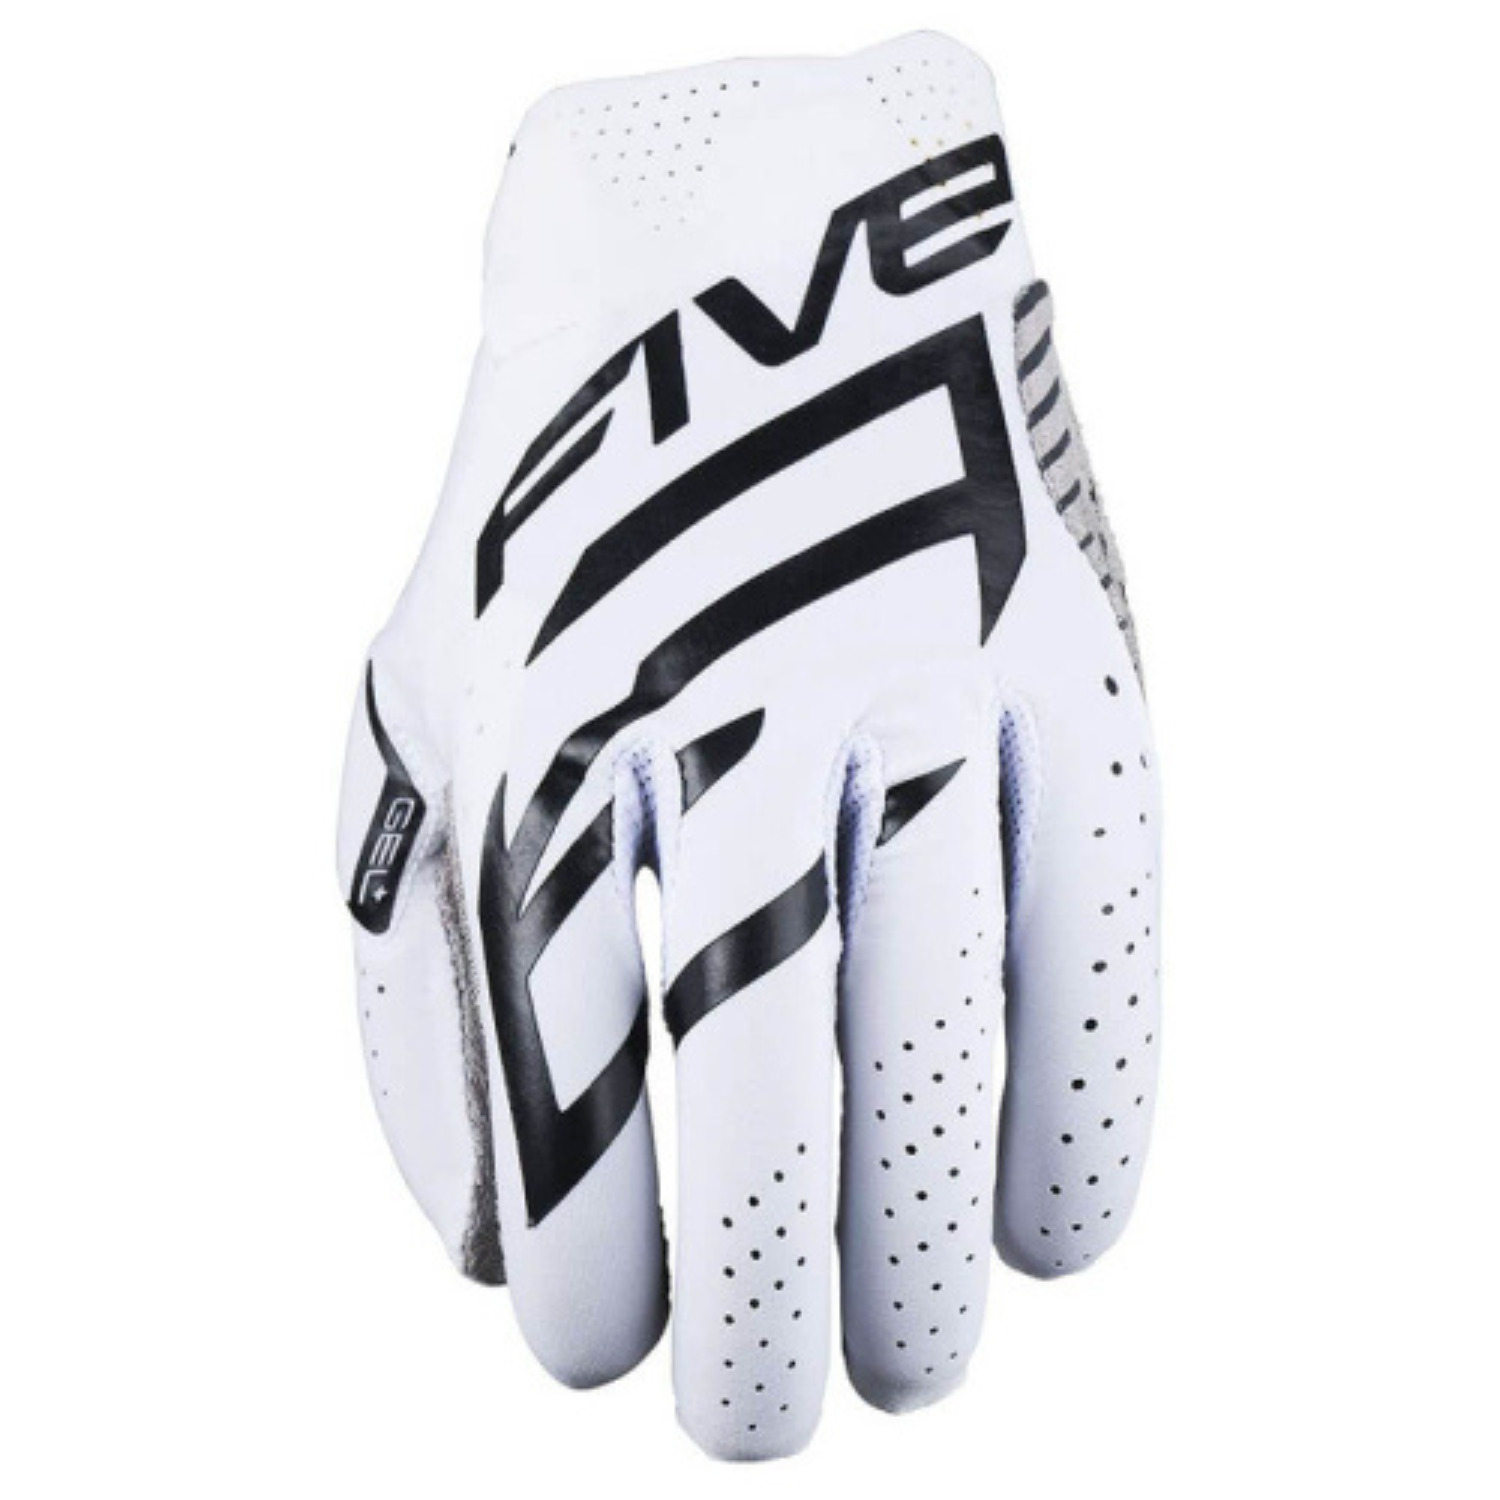 Image of Five MXF Race Gloves White Black Size S ID 3841300111518